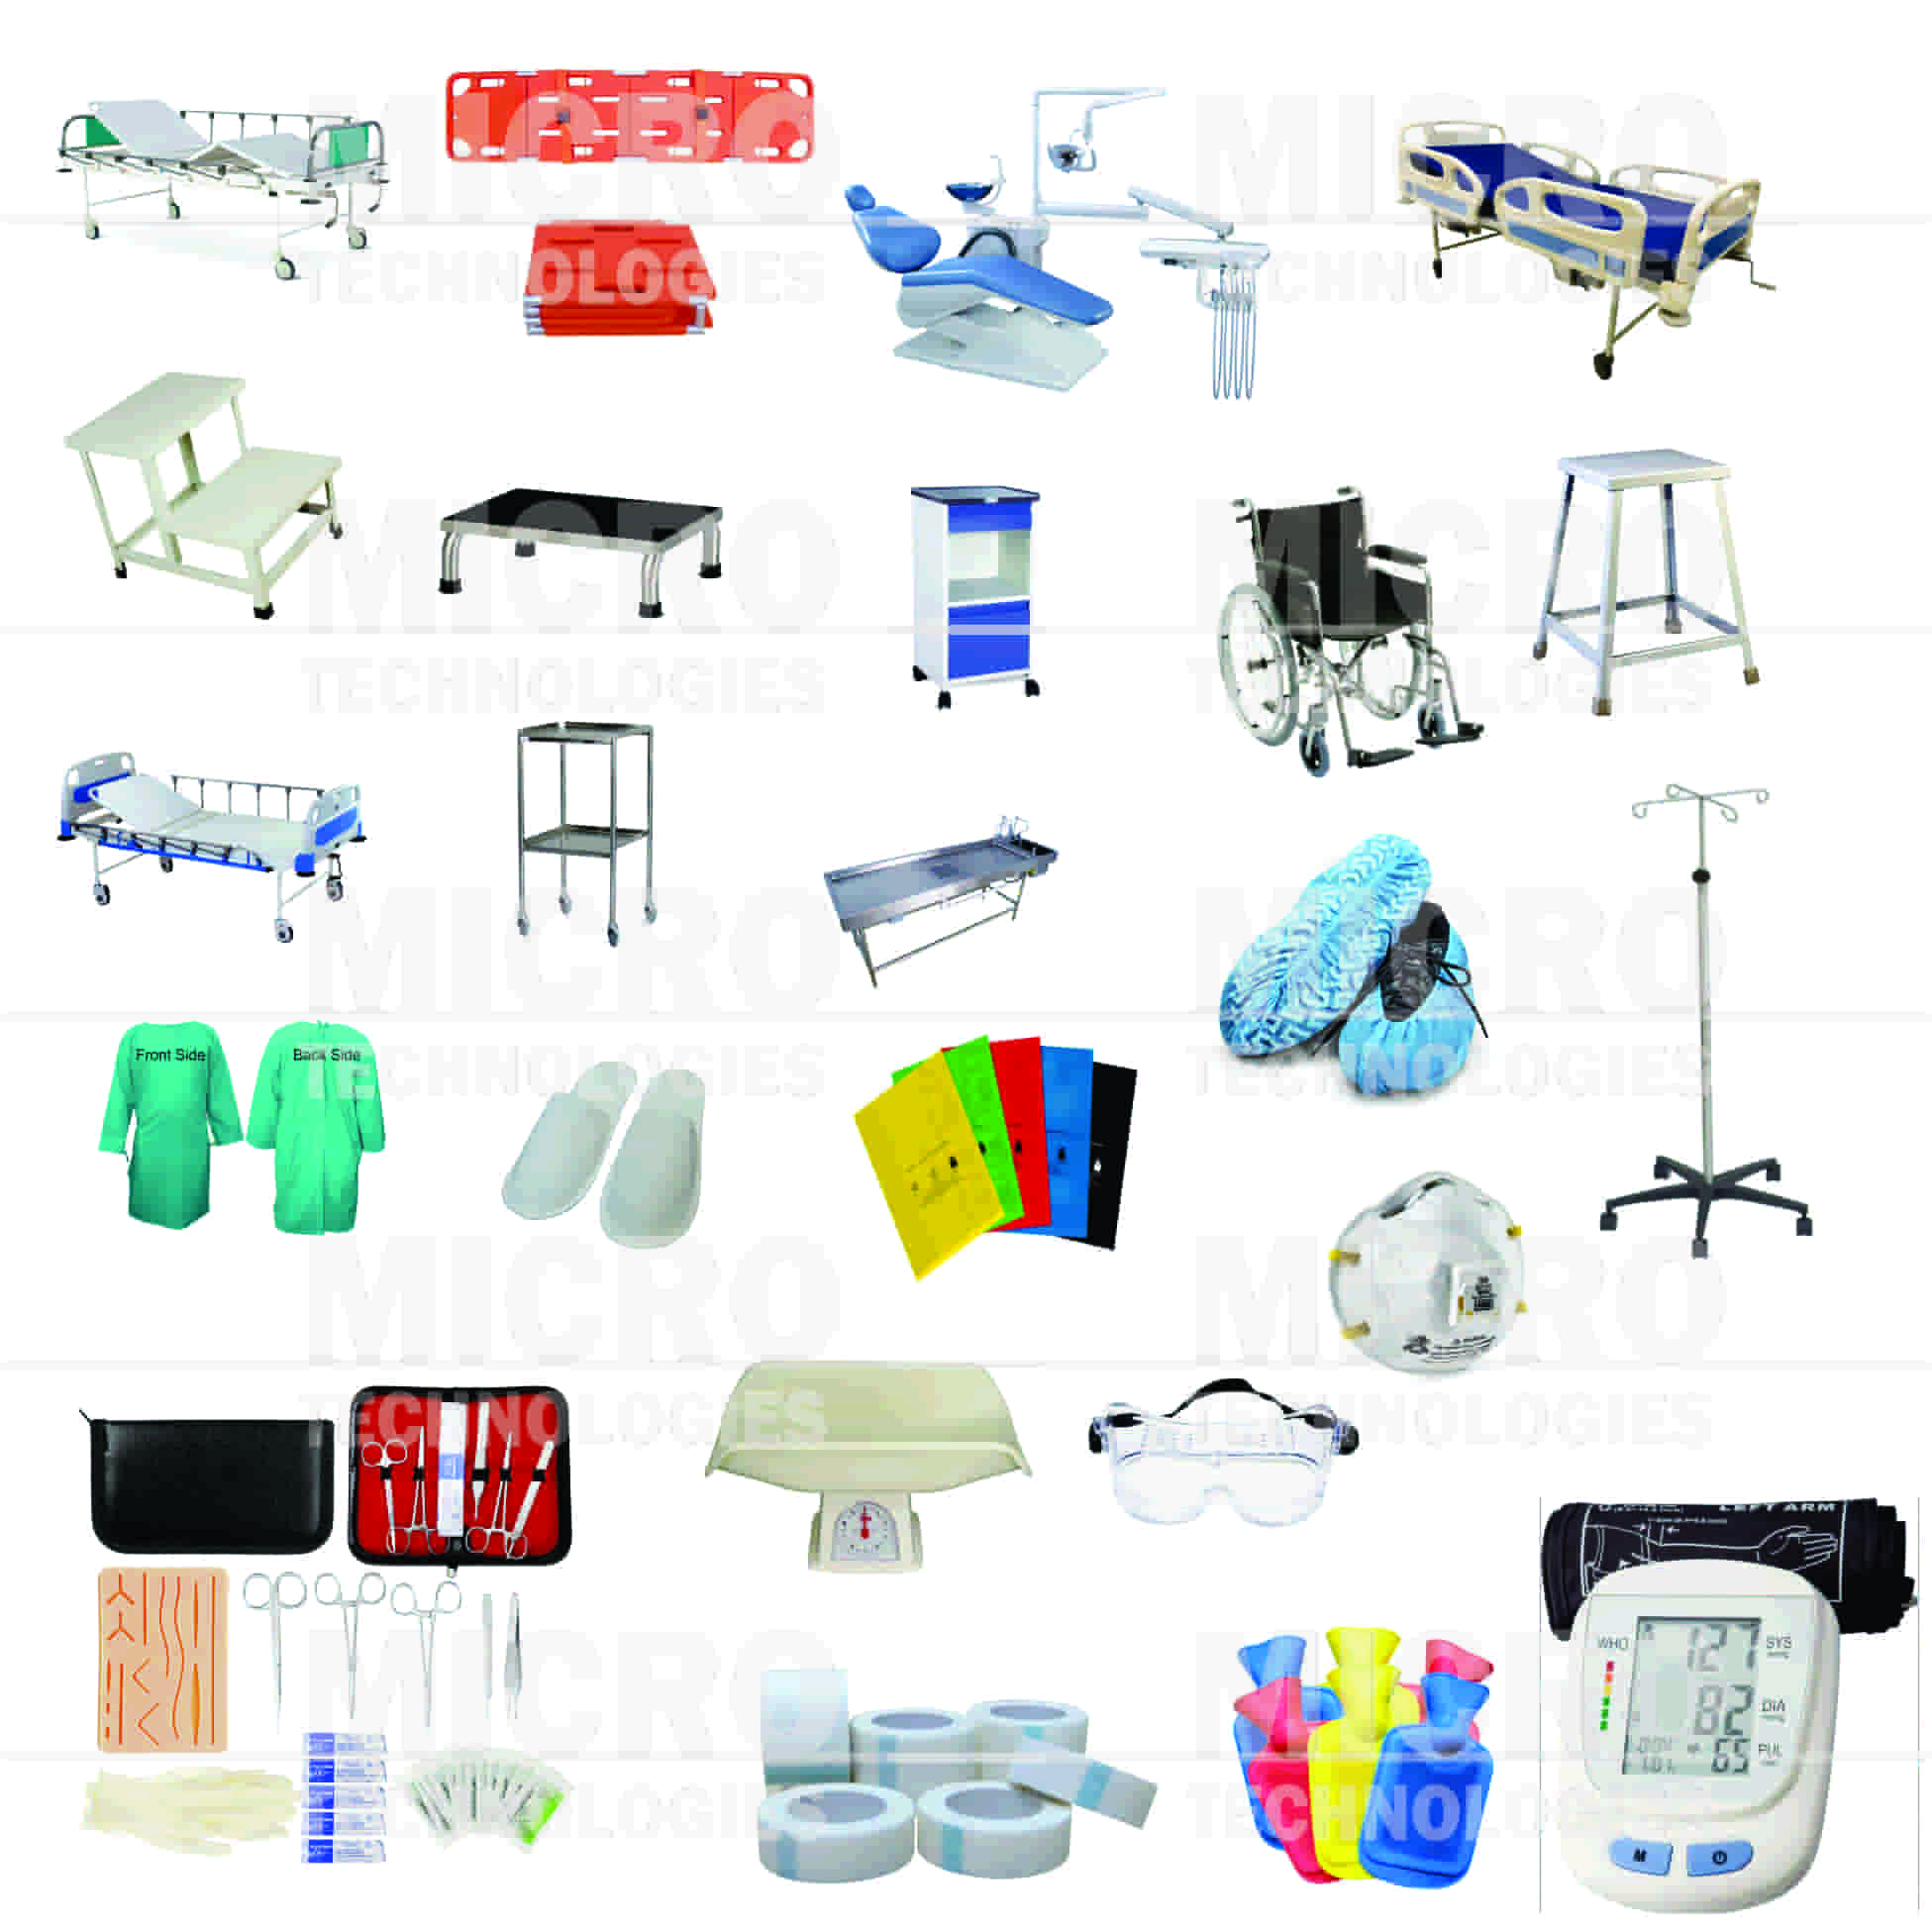 Micro Technologies offer all kind of Pharmacy instruments Like